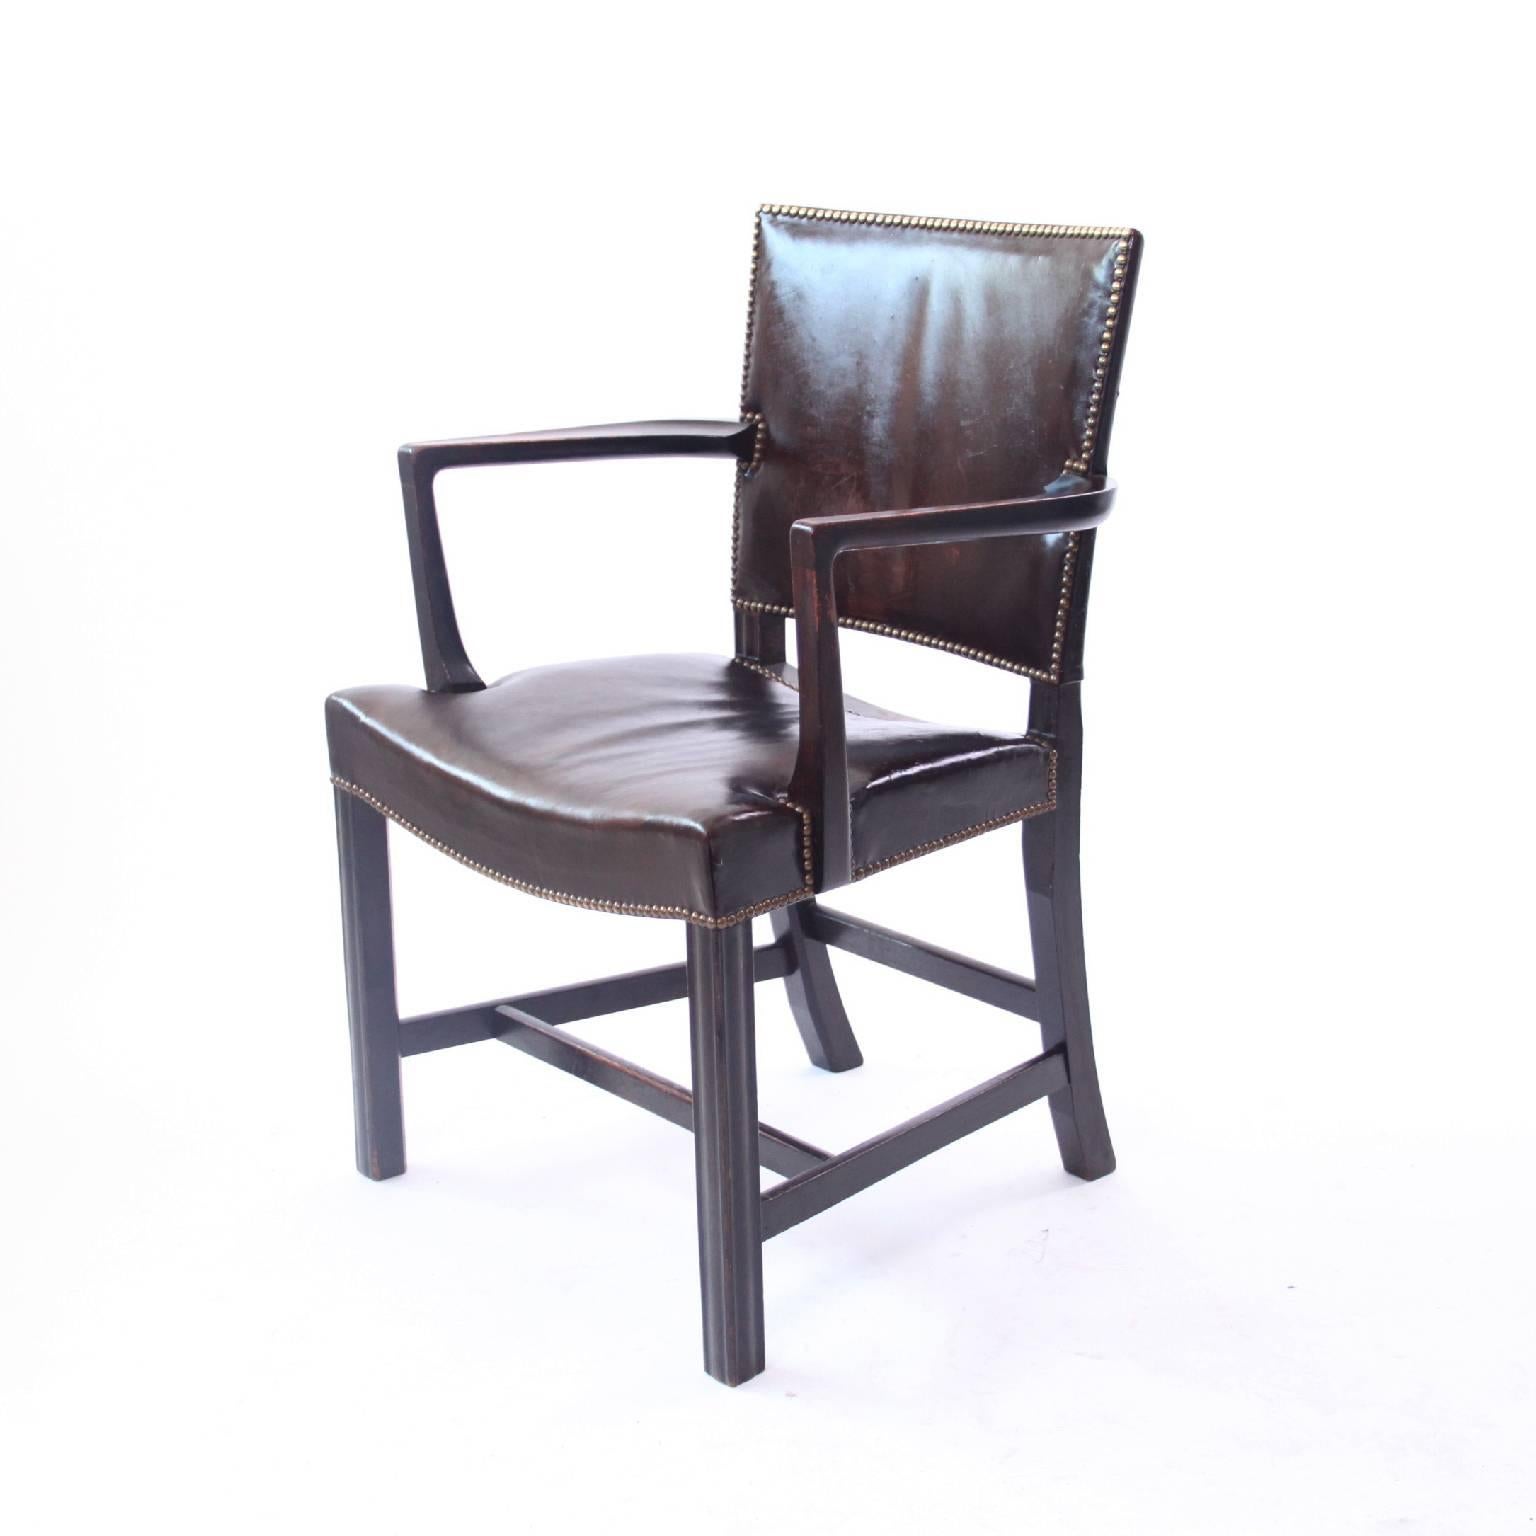 Kaare Klint & Rud Rasmussen Snedkerier - Scandinavian Modern

Kaare Klint model no. 3758A. 'Red Armchair' / 'Barcelona Chair' in dark brown leather, dark stained oak frame with profiled legs and brass nails. 

Designed, 1930.

Executed by